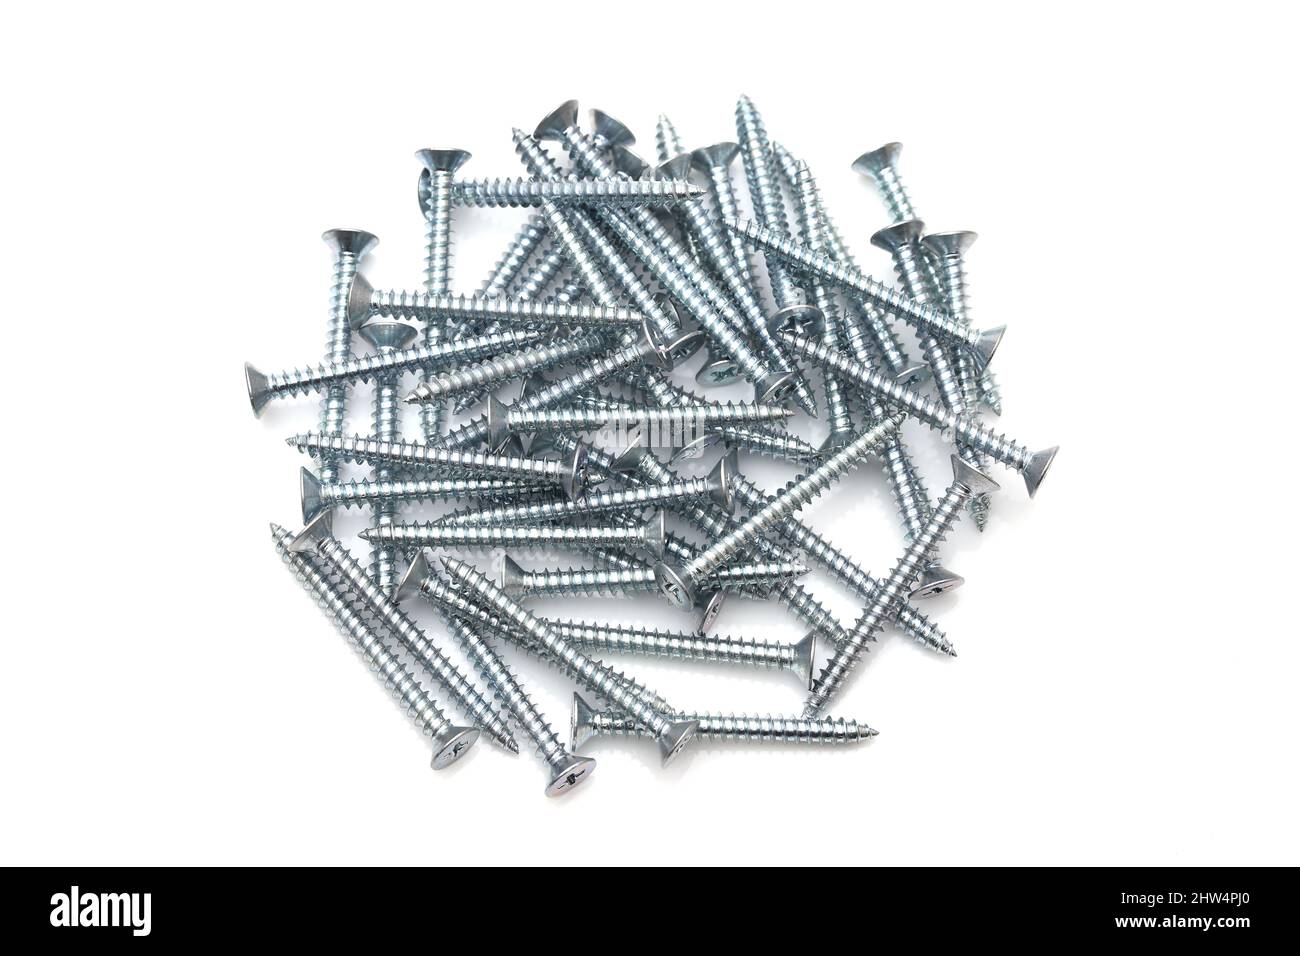 Pile of silver tapping screws isolated on white background Stock Photo